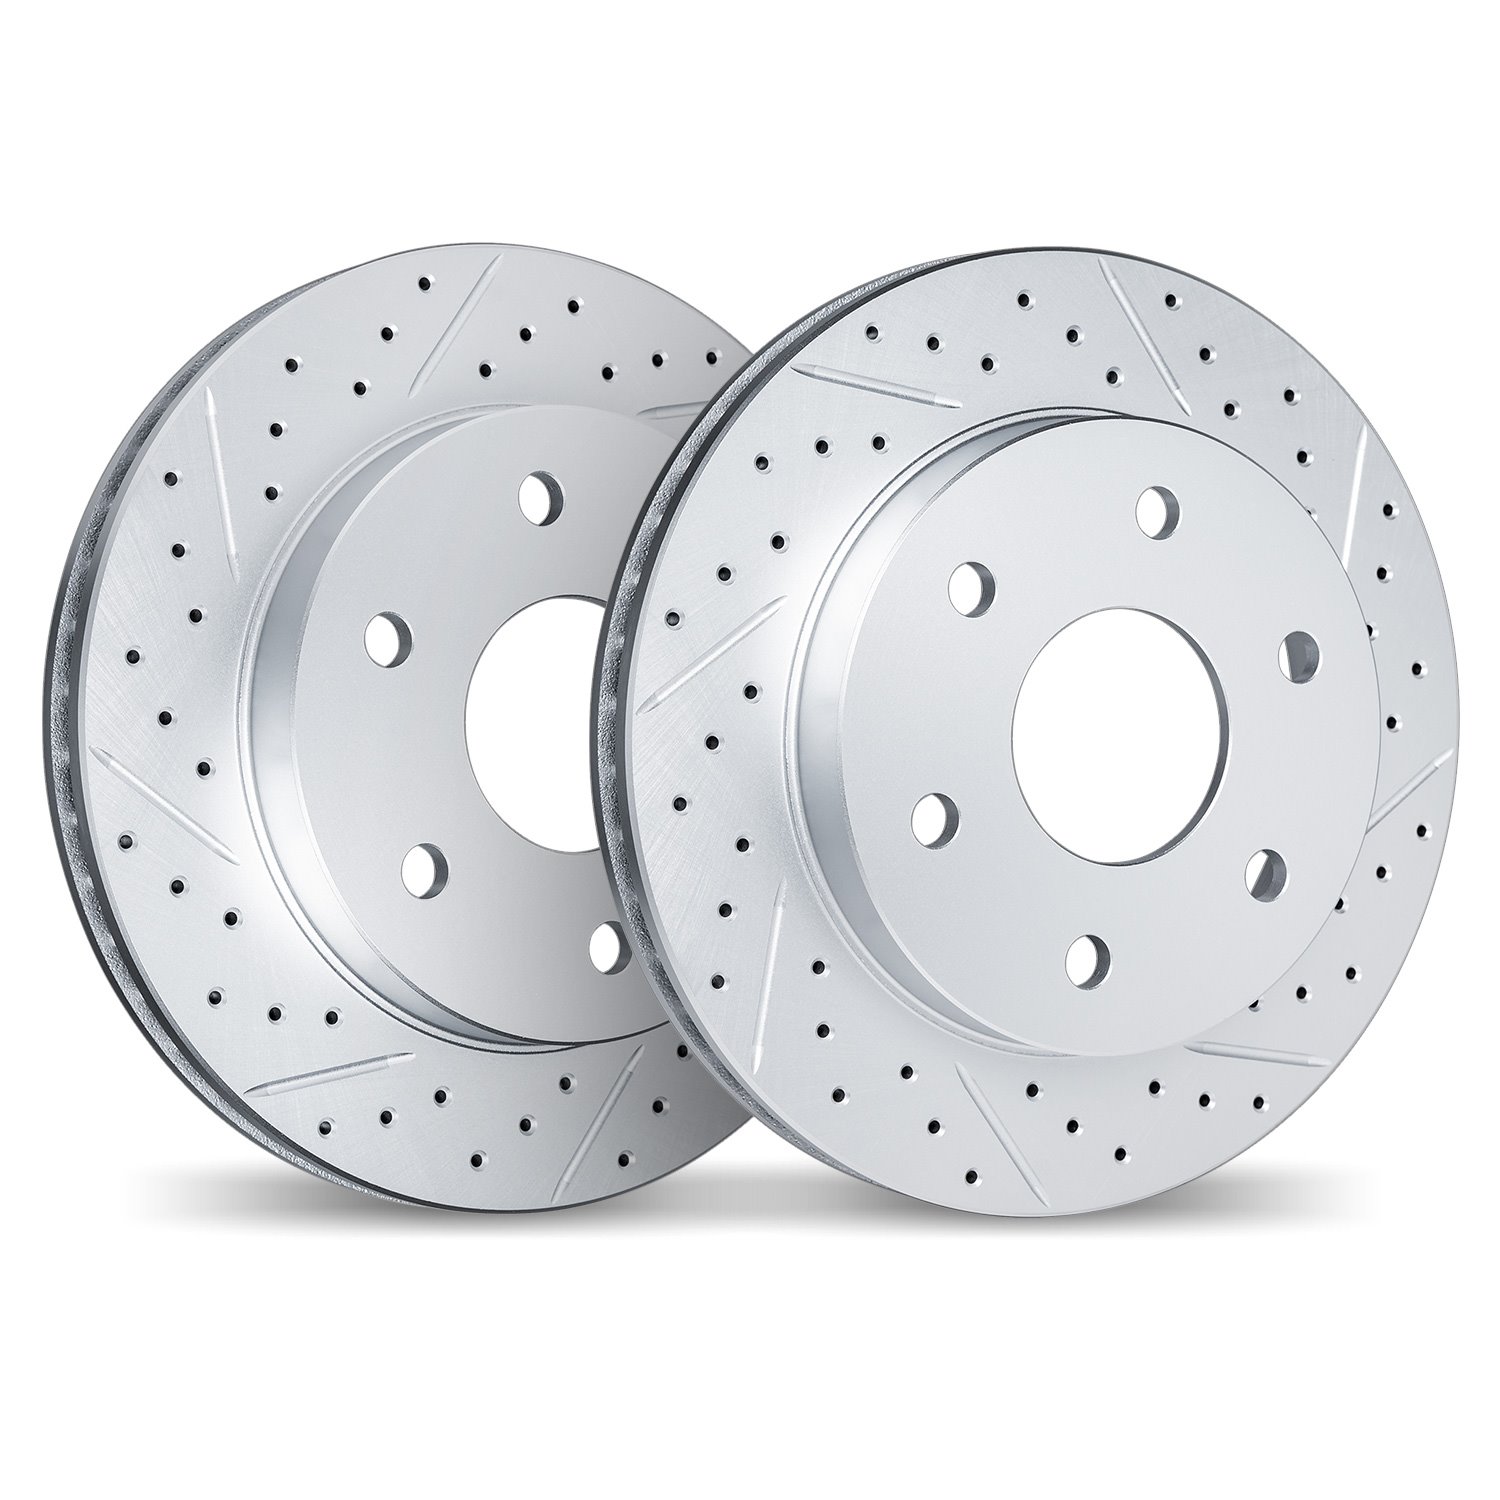 2002-47144 Geoperformance Drilled/Slotted Brake Rotors, Fits Select GM, Position: Front